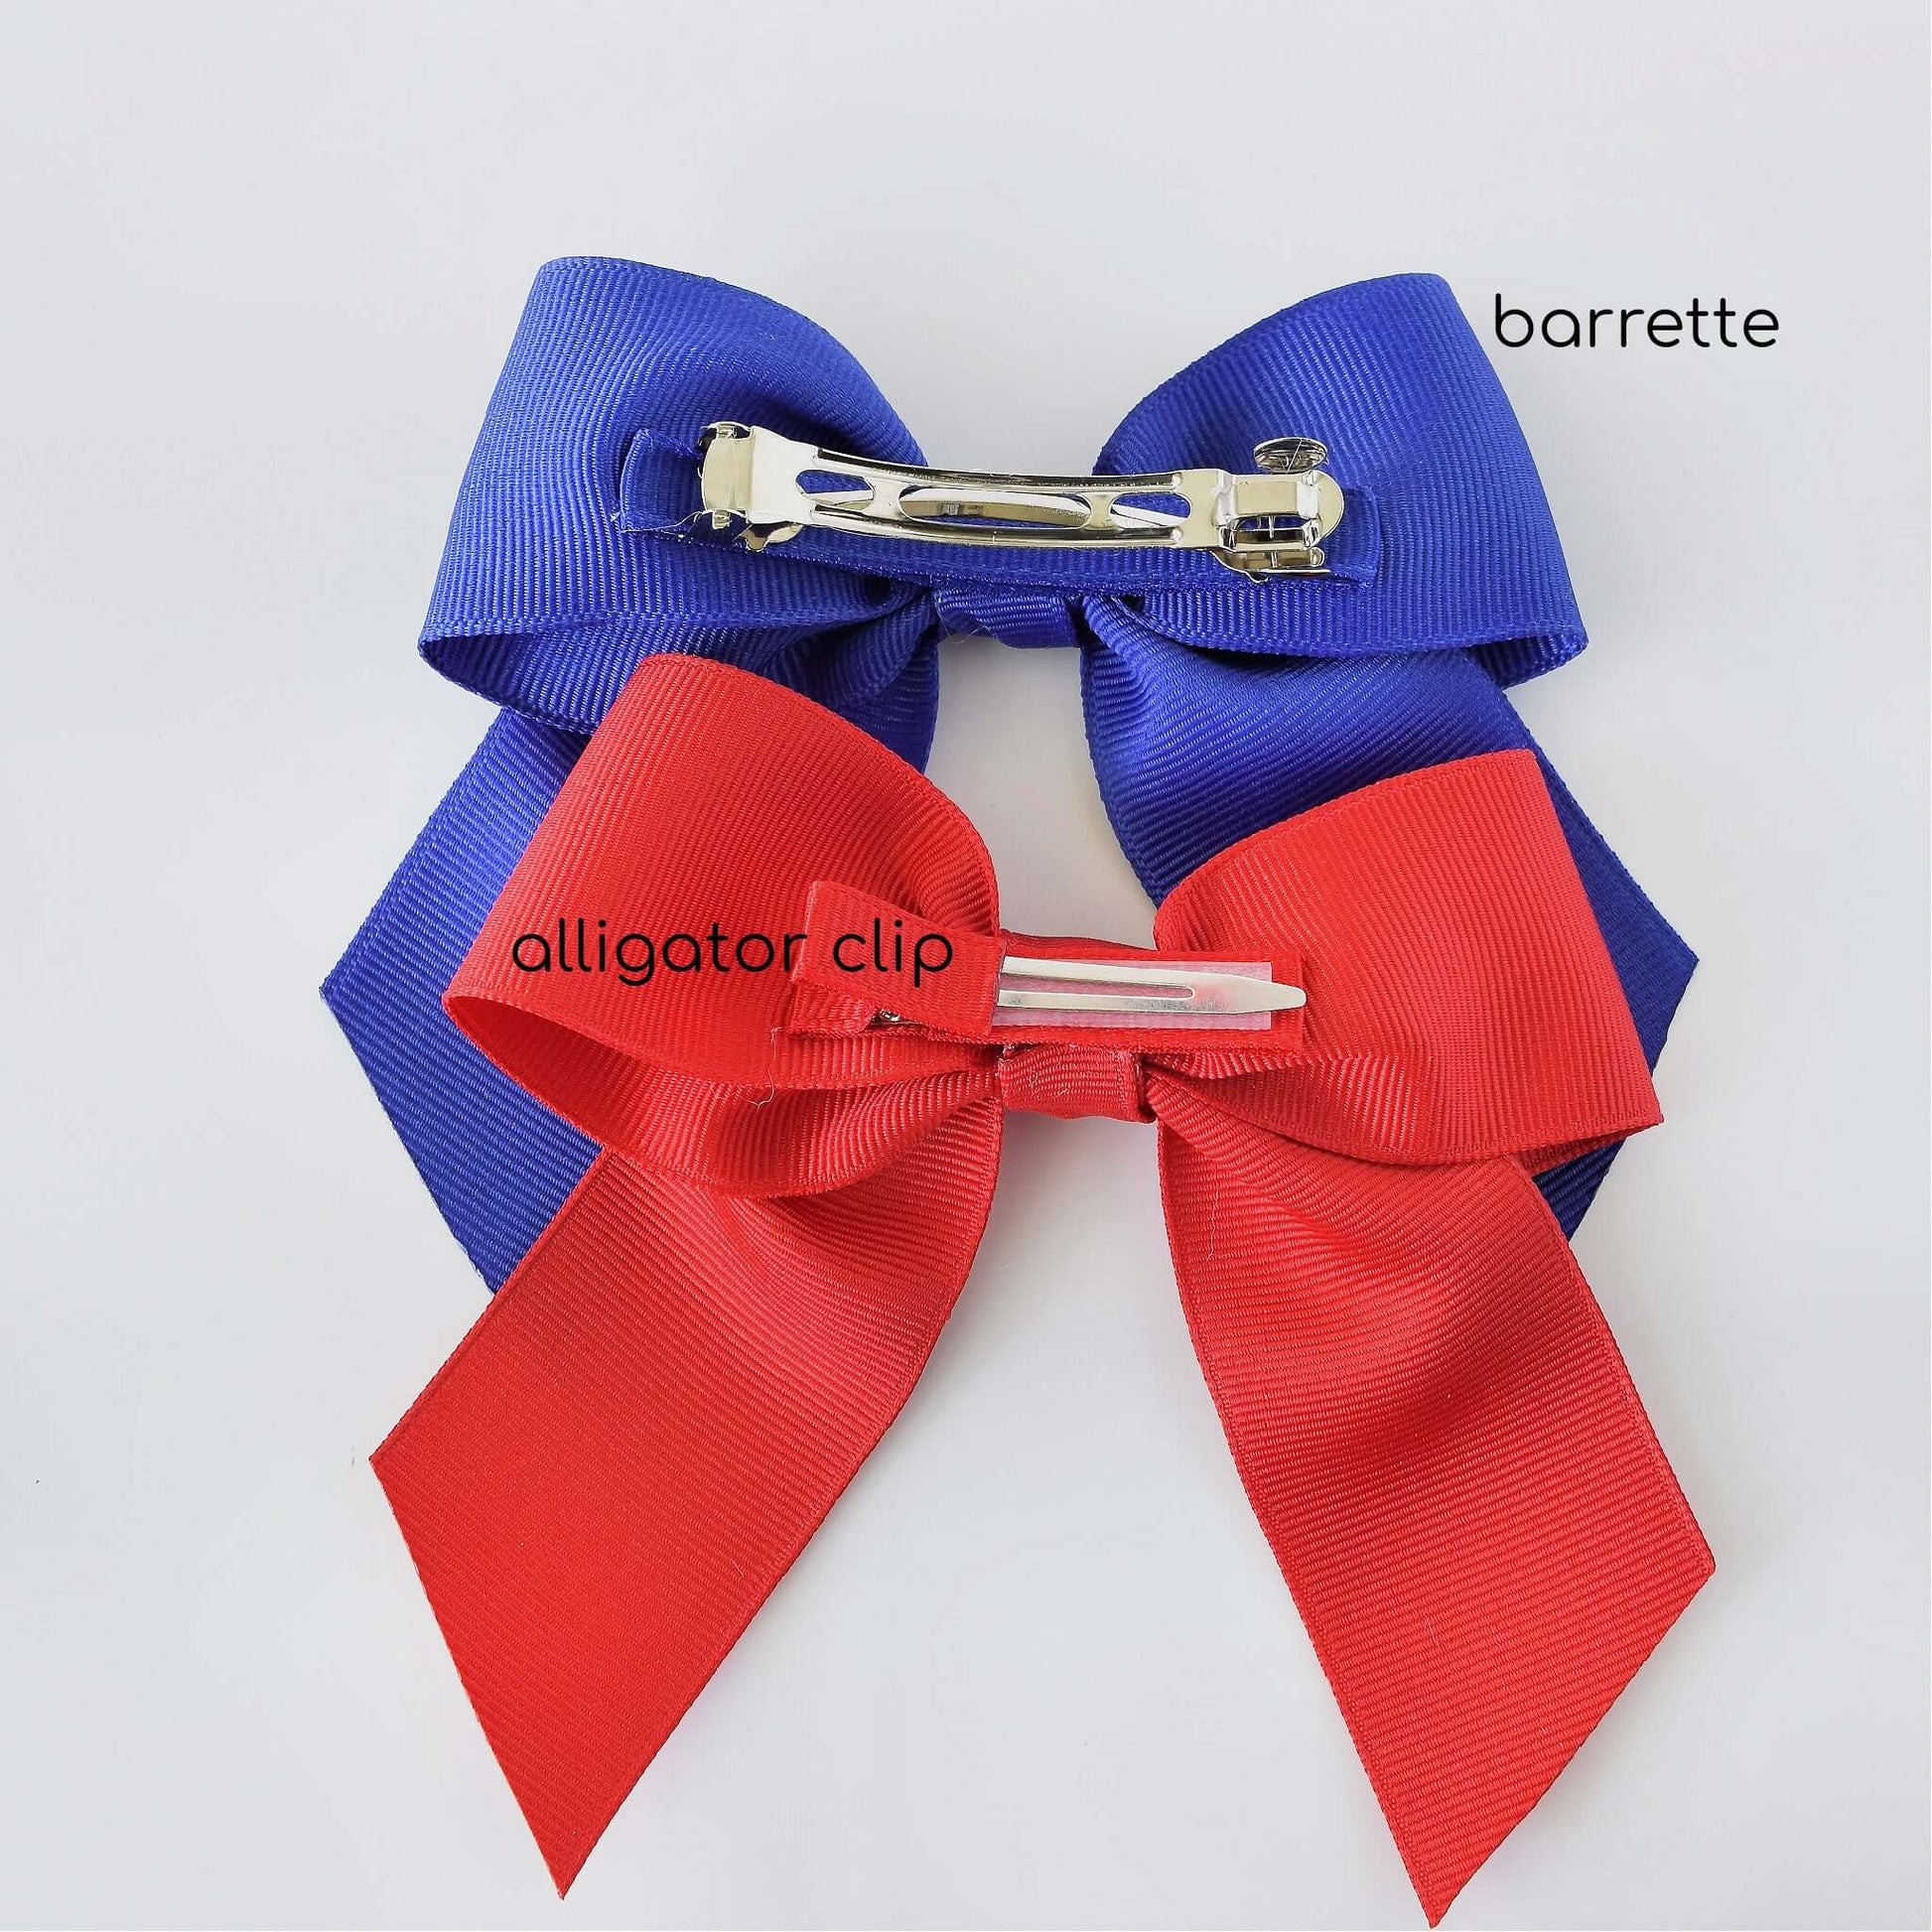 Red and blue grosgrain sailor bows with alligator clip and French barrette on white background.